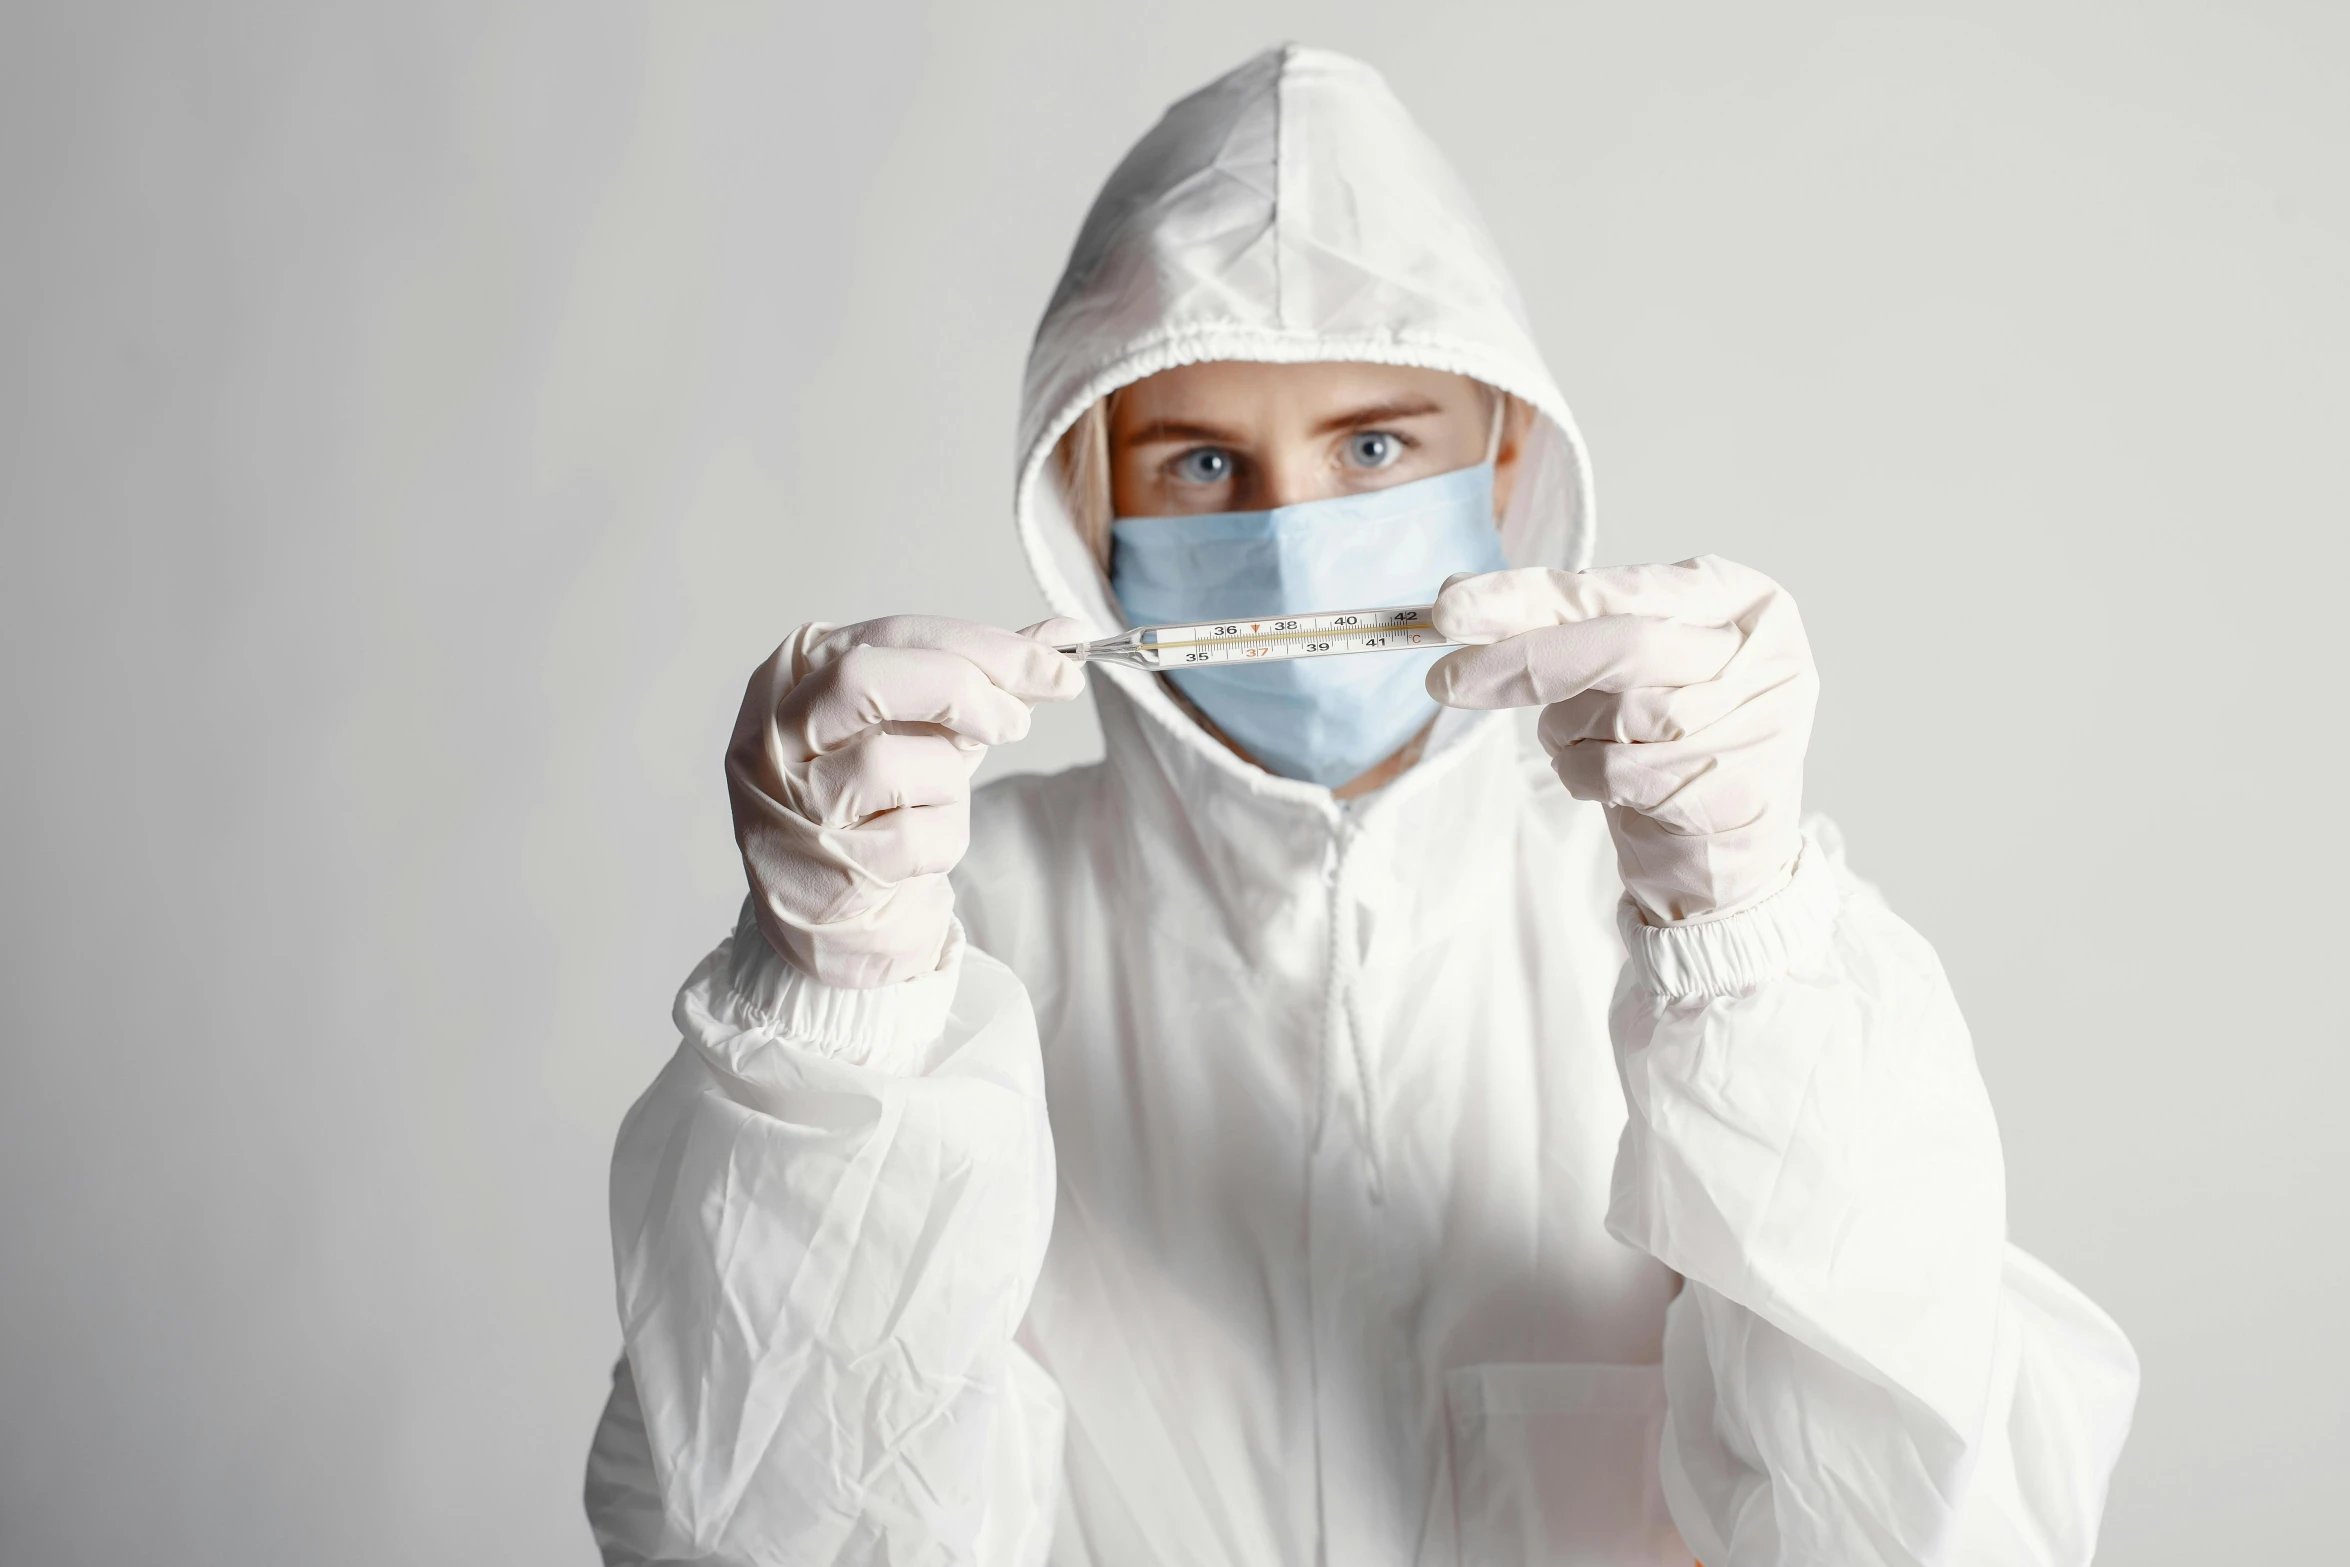 a person wearing a protective suit and gloves, an album cover, pexels contest winner, syringe, white clothing, concentration, avatar image